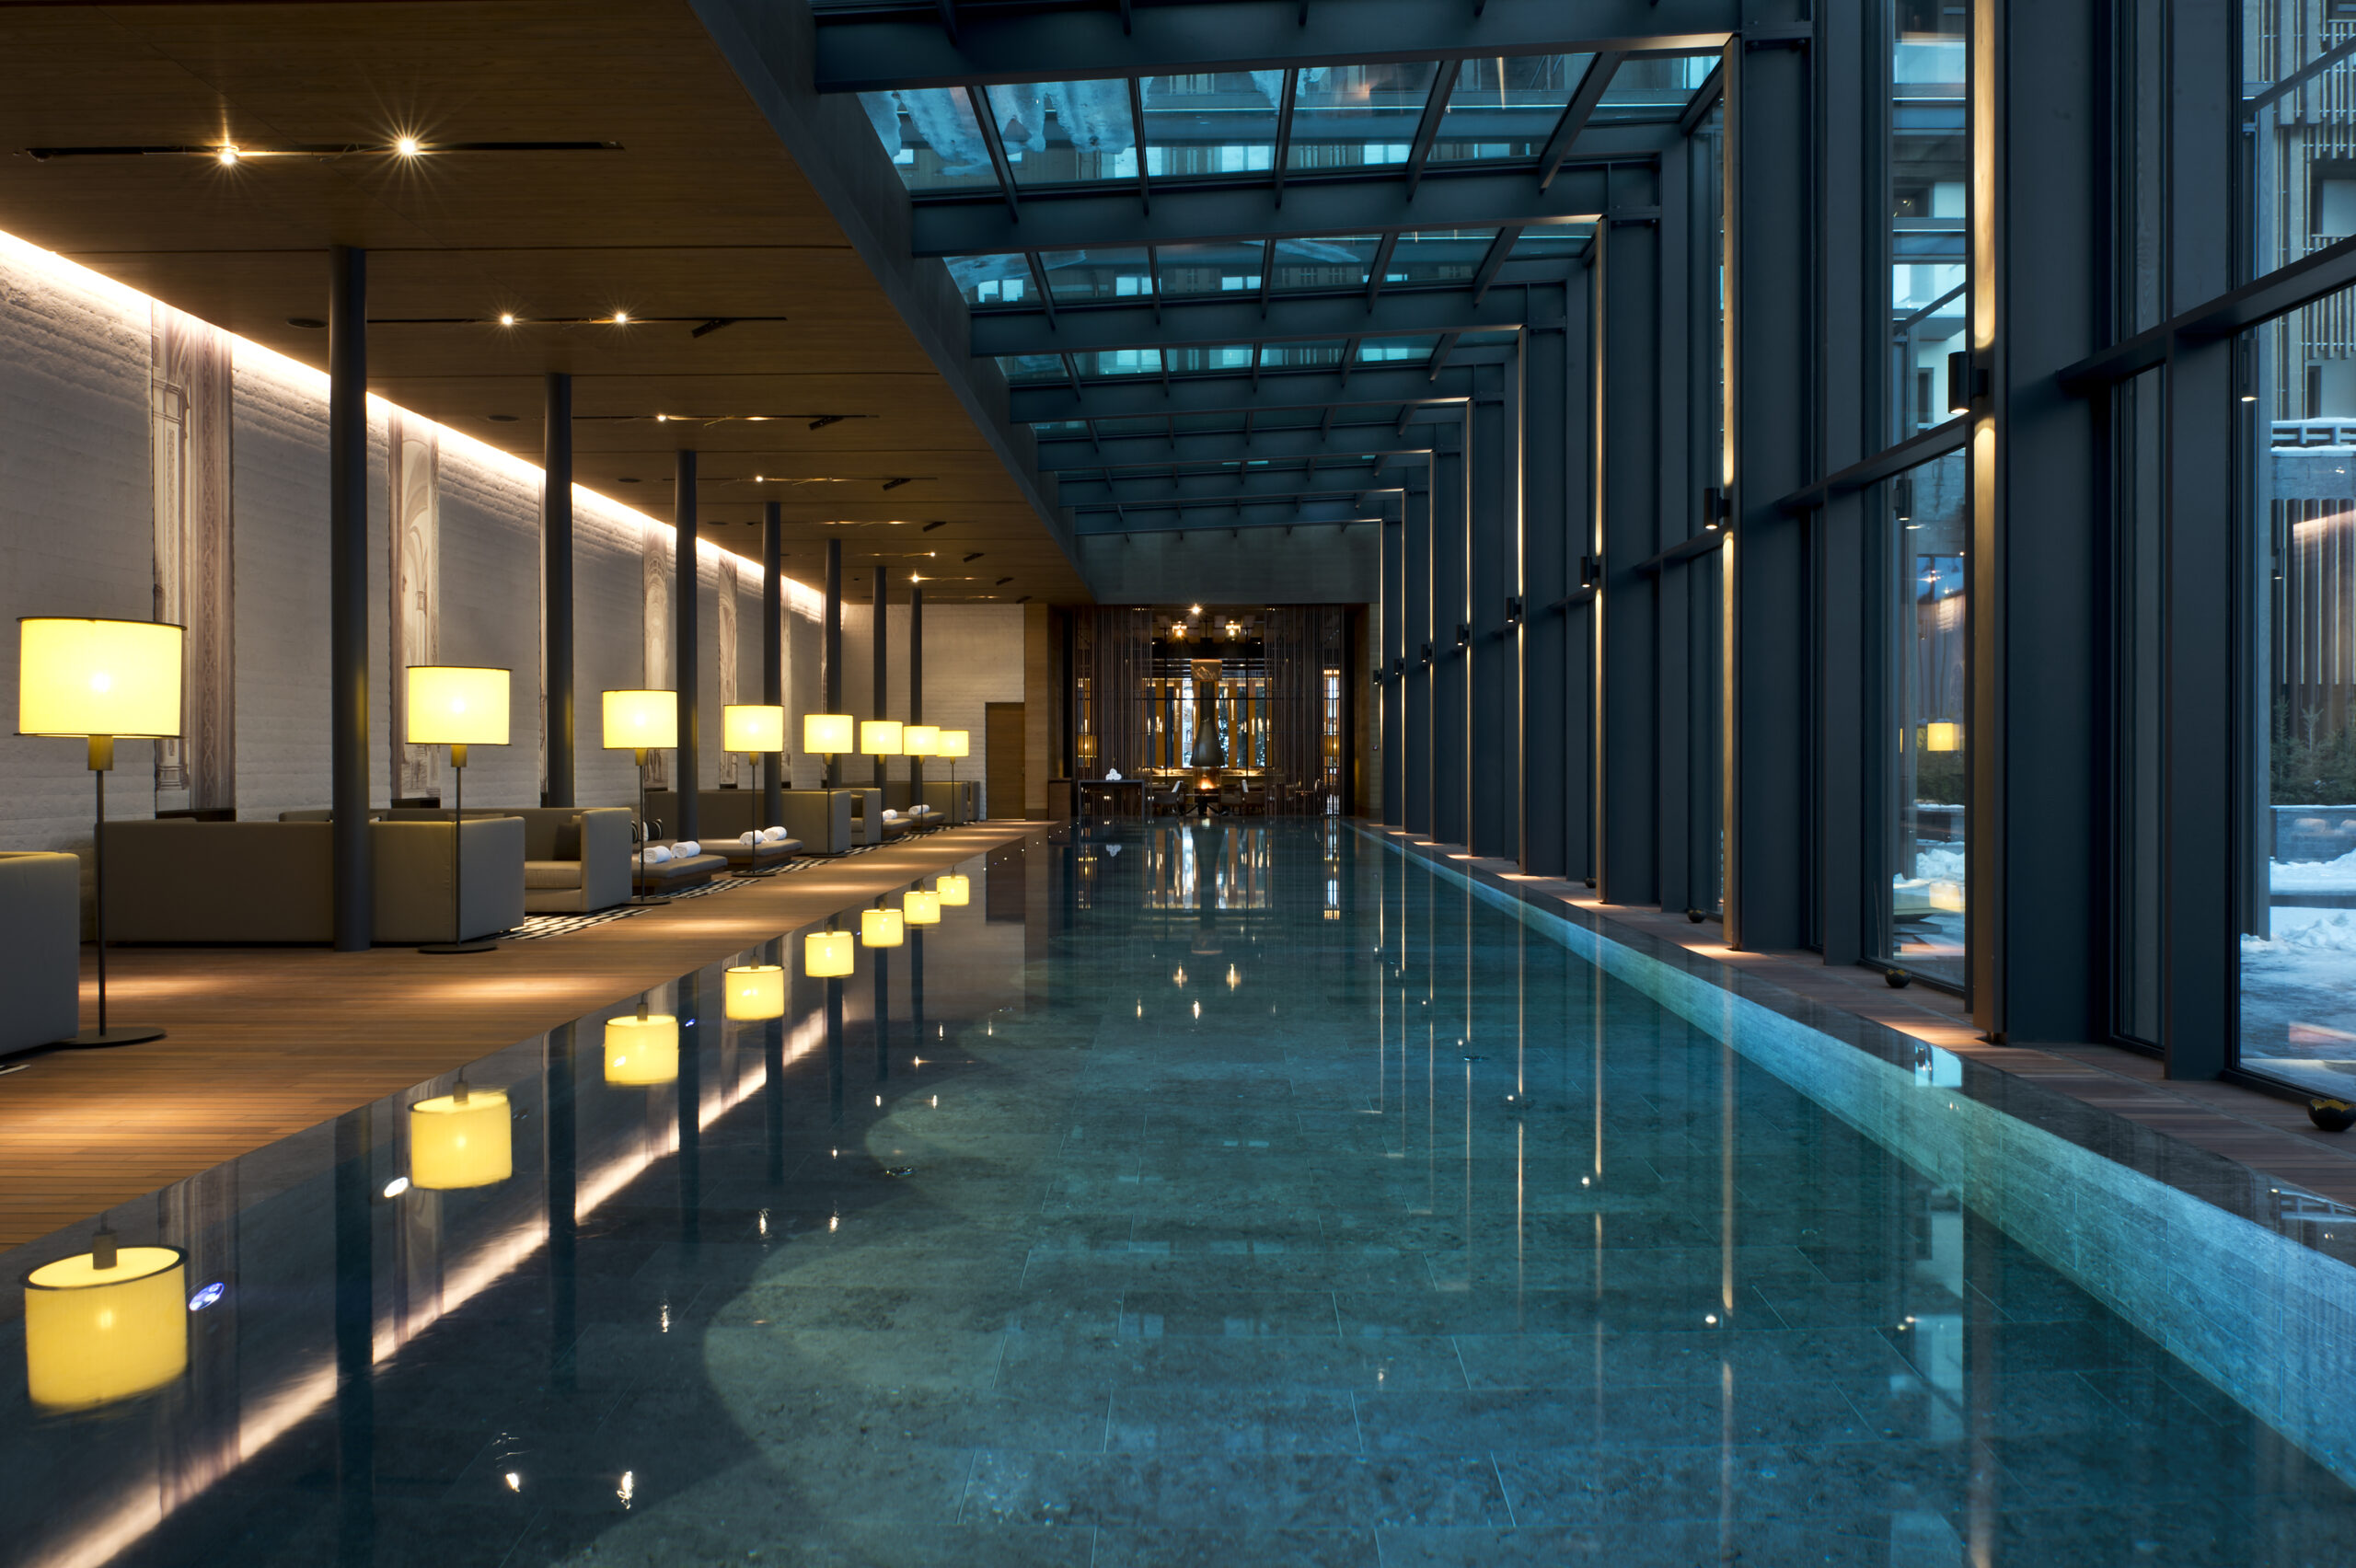 Indoor pool by night